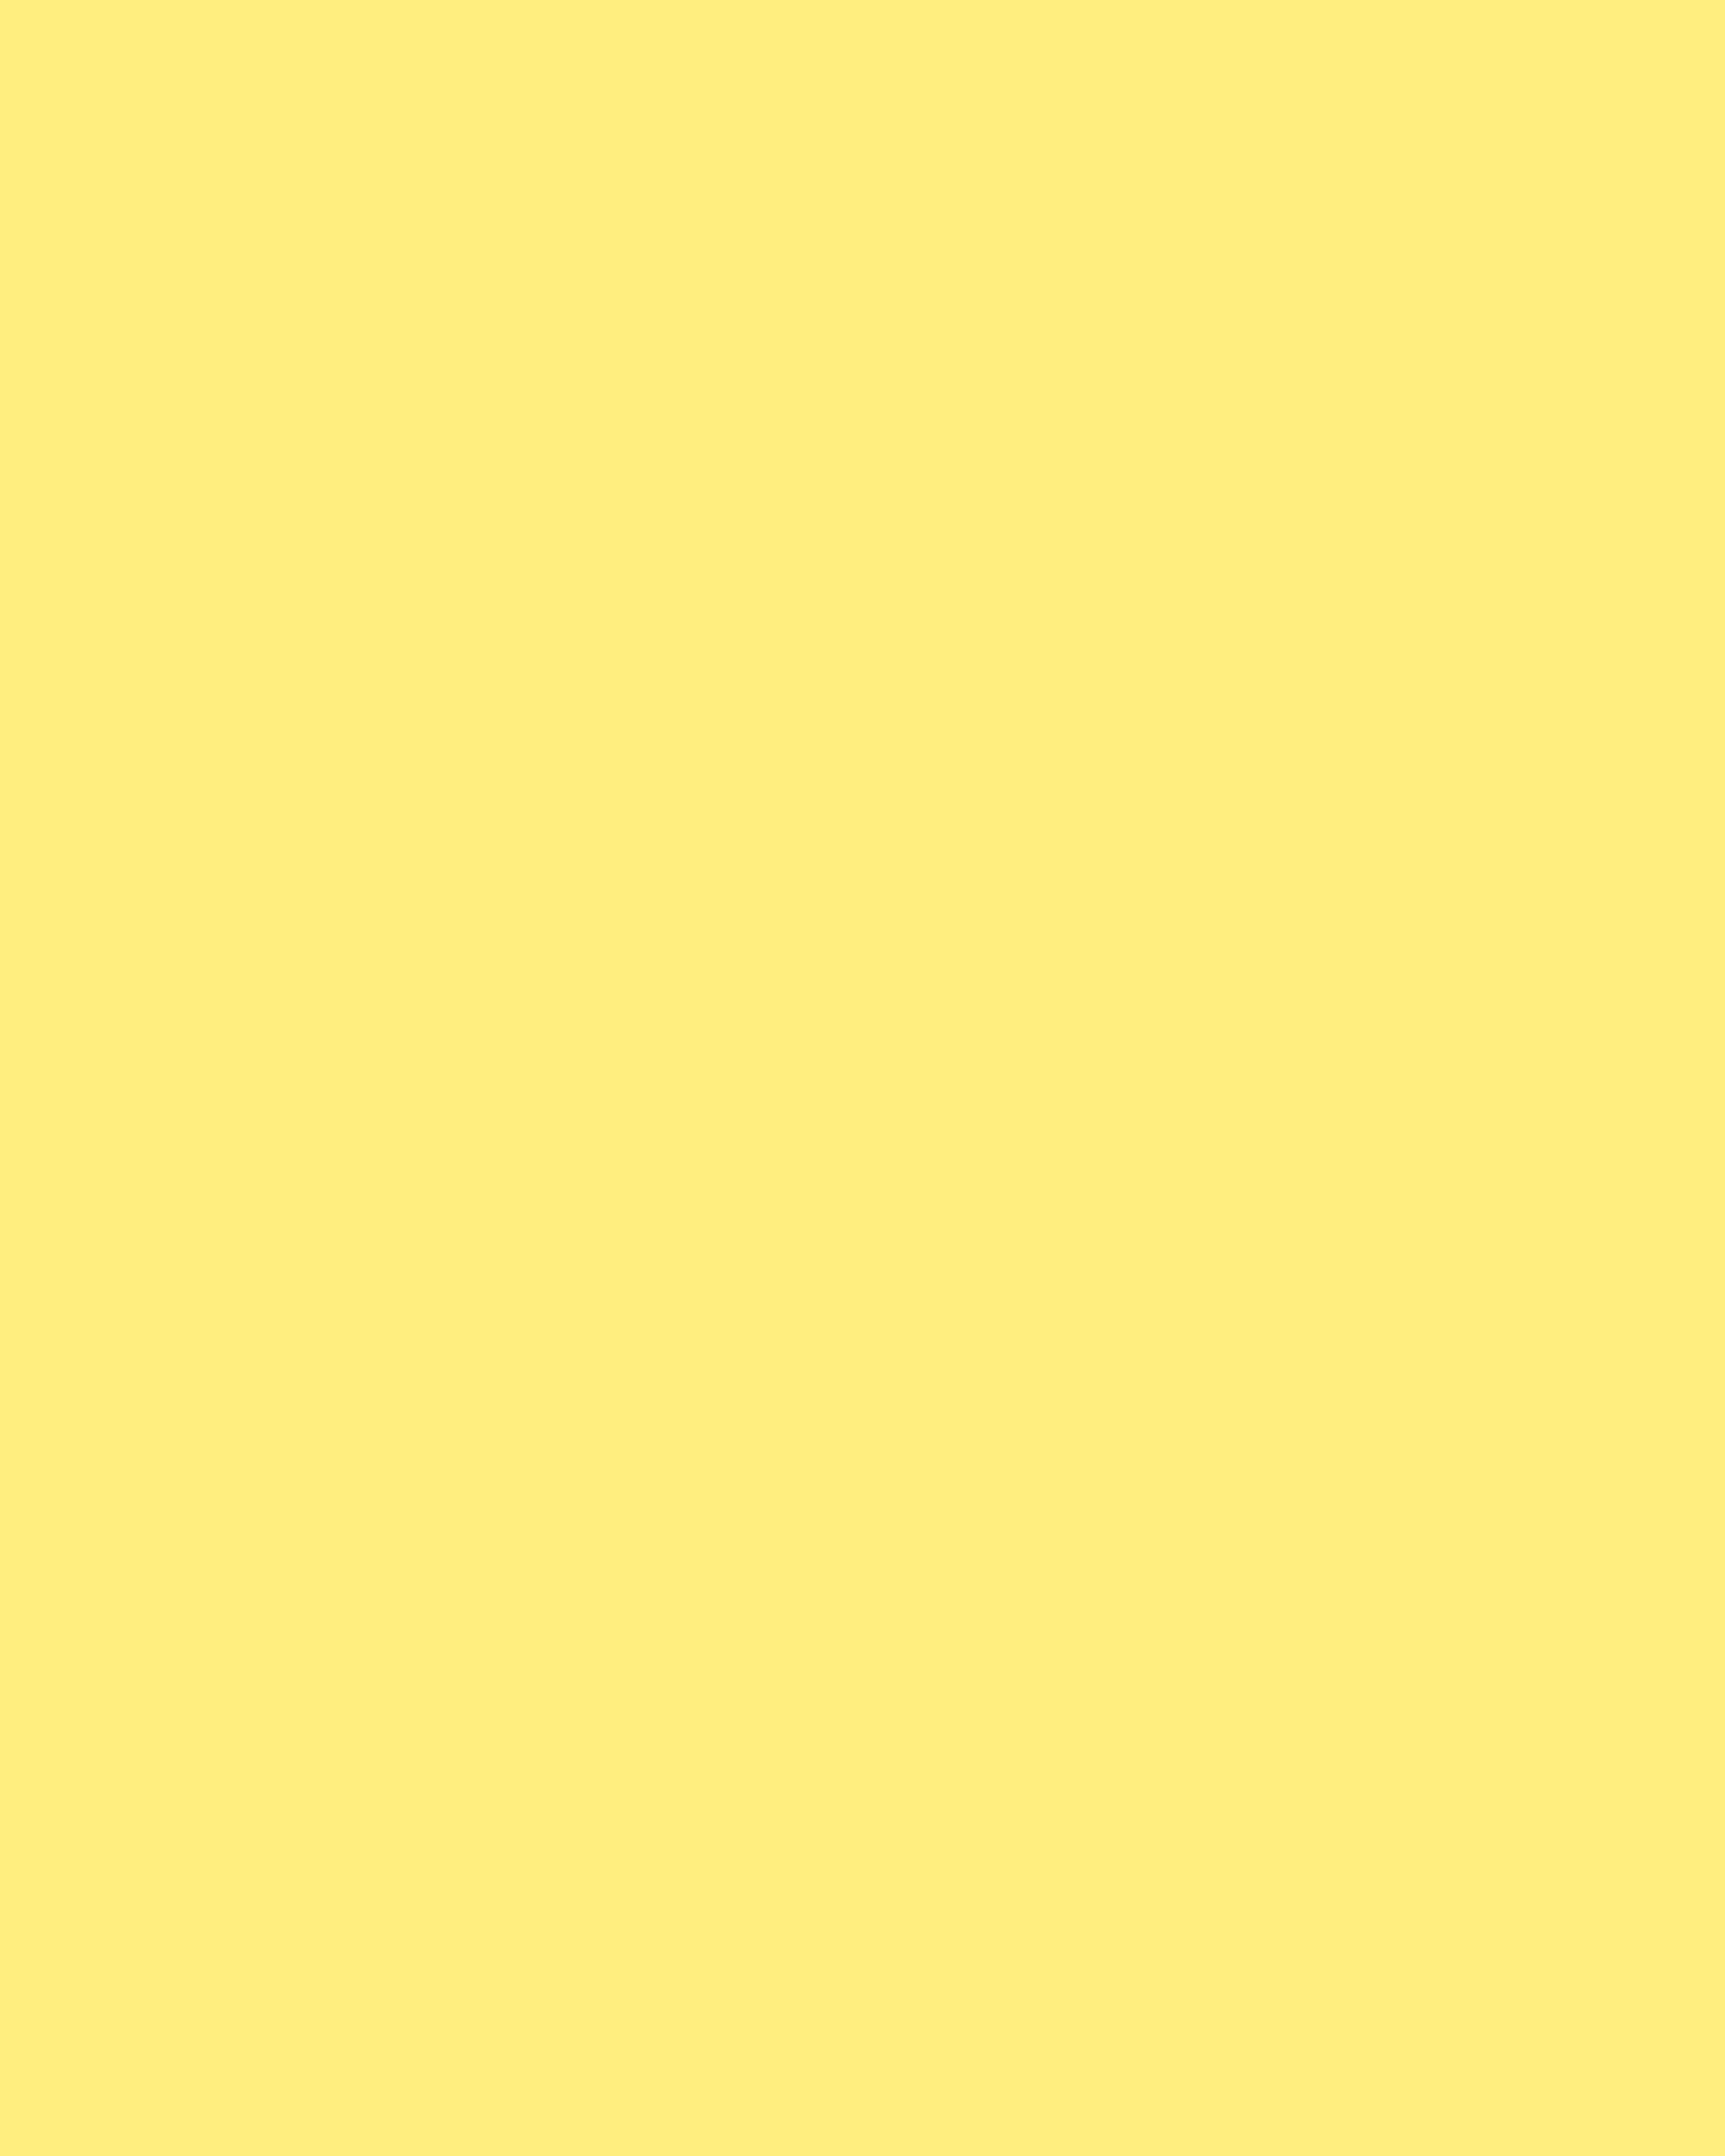 Light Yellow solid ffee7f for background@2x.png